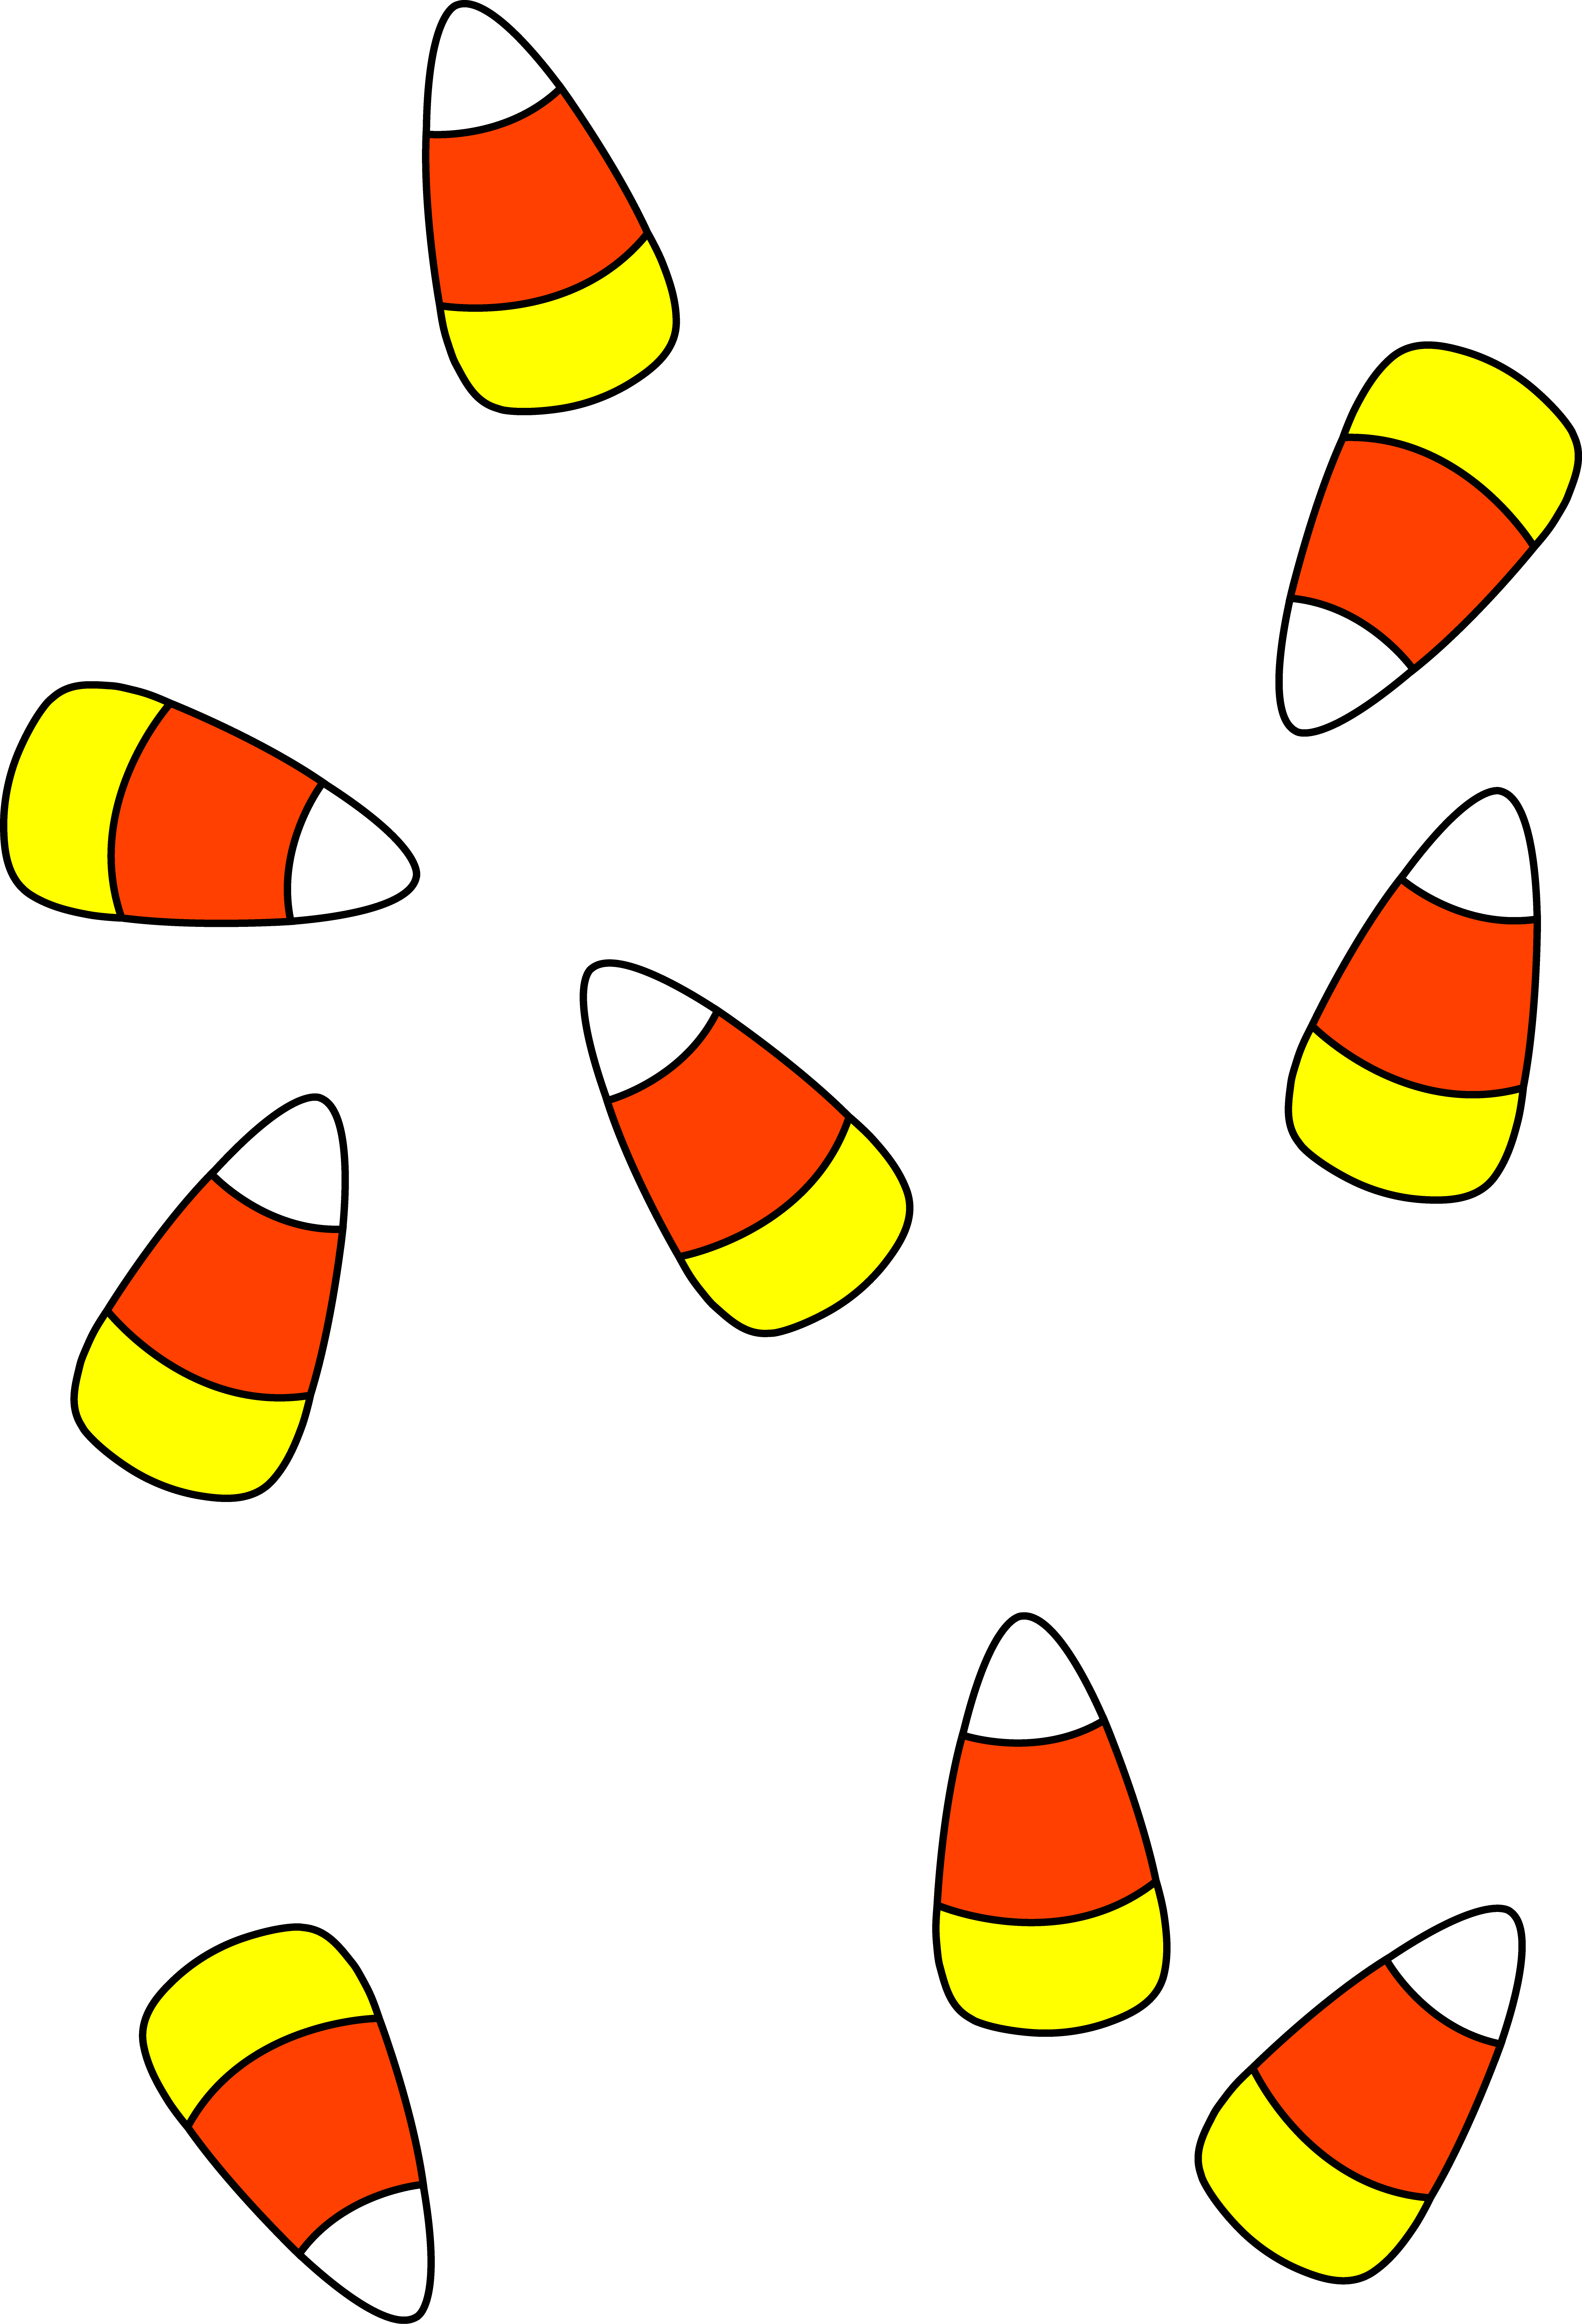 Candy corn scattered halloween candyrn free clip art